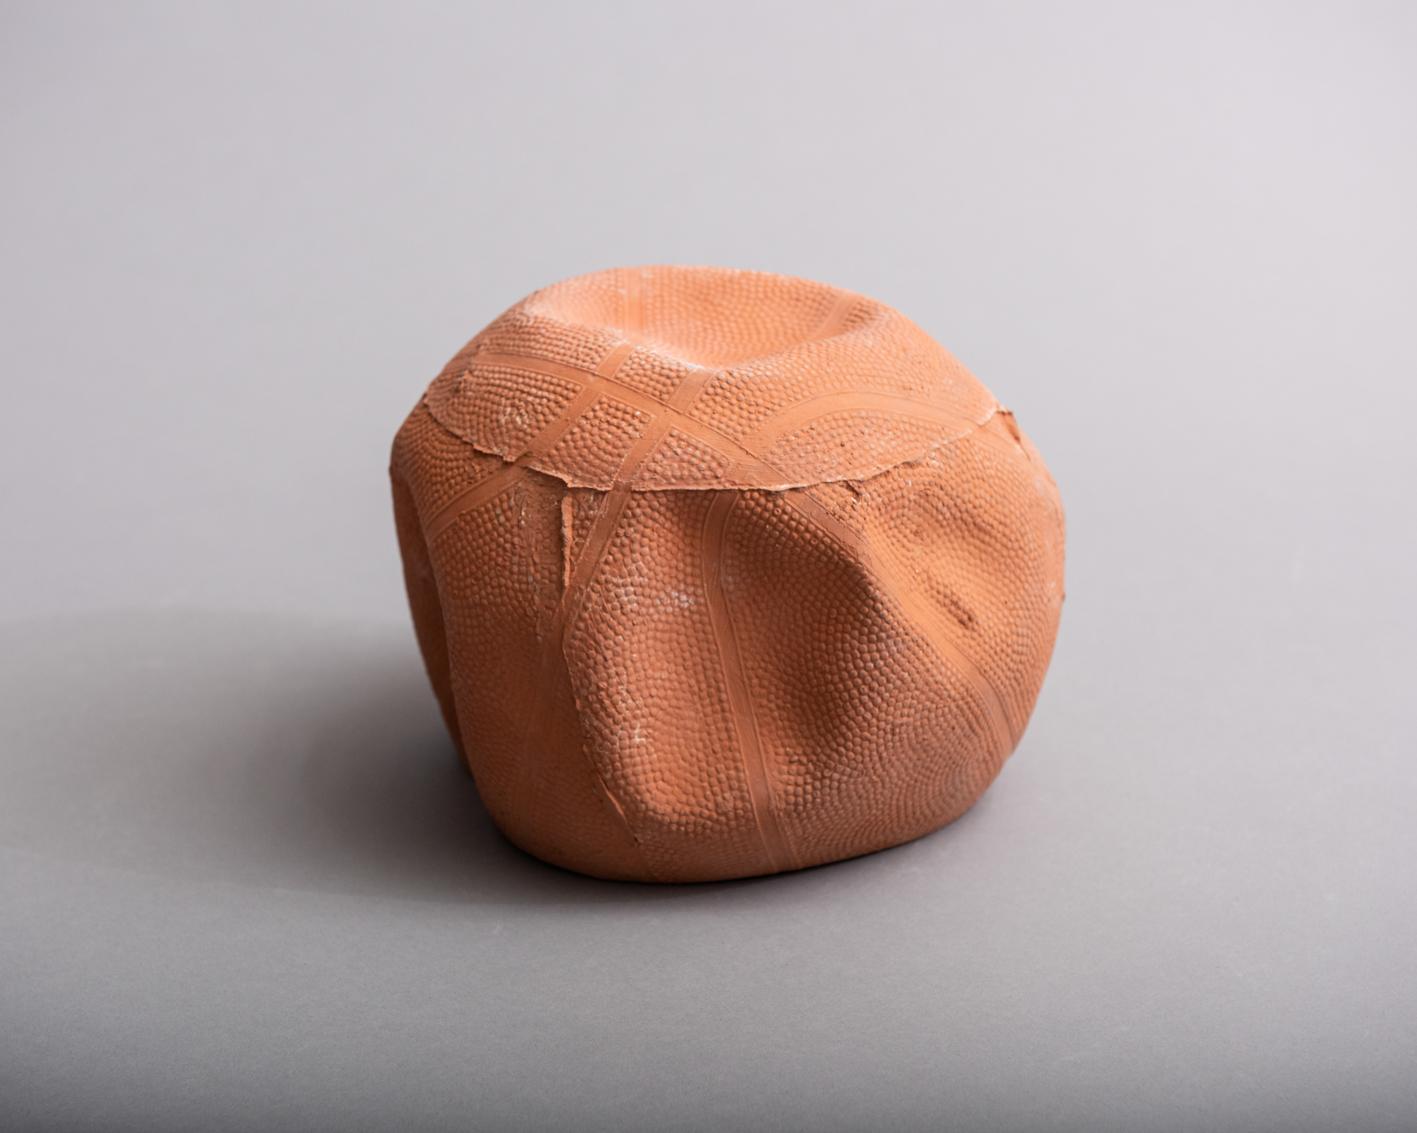 Big Balls big bowls – A deflated basket-ball first kicked along the streets of Vancouver after late night beers and sushi with friends. 

Cast in small batches in terracotta, retaining its crumpled lines and mimicking its original color, this is a